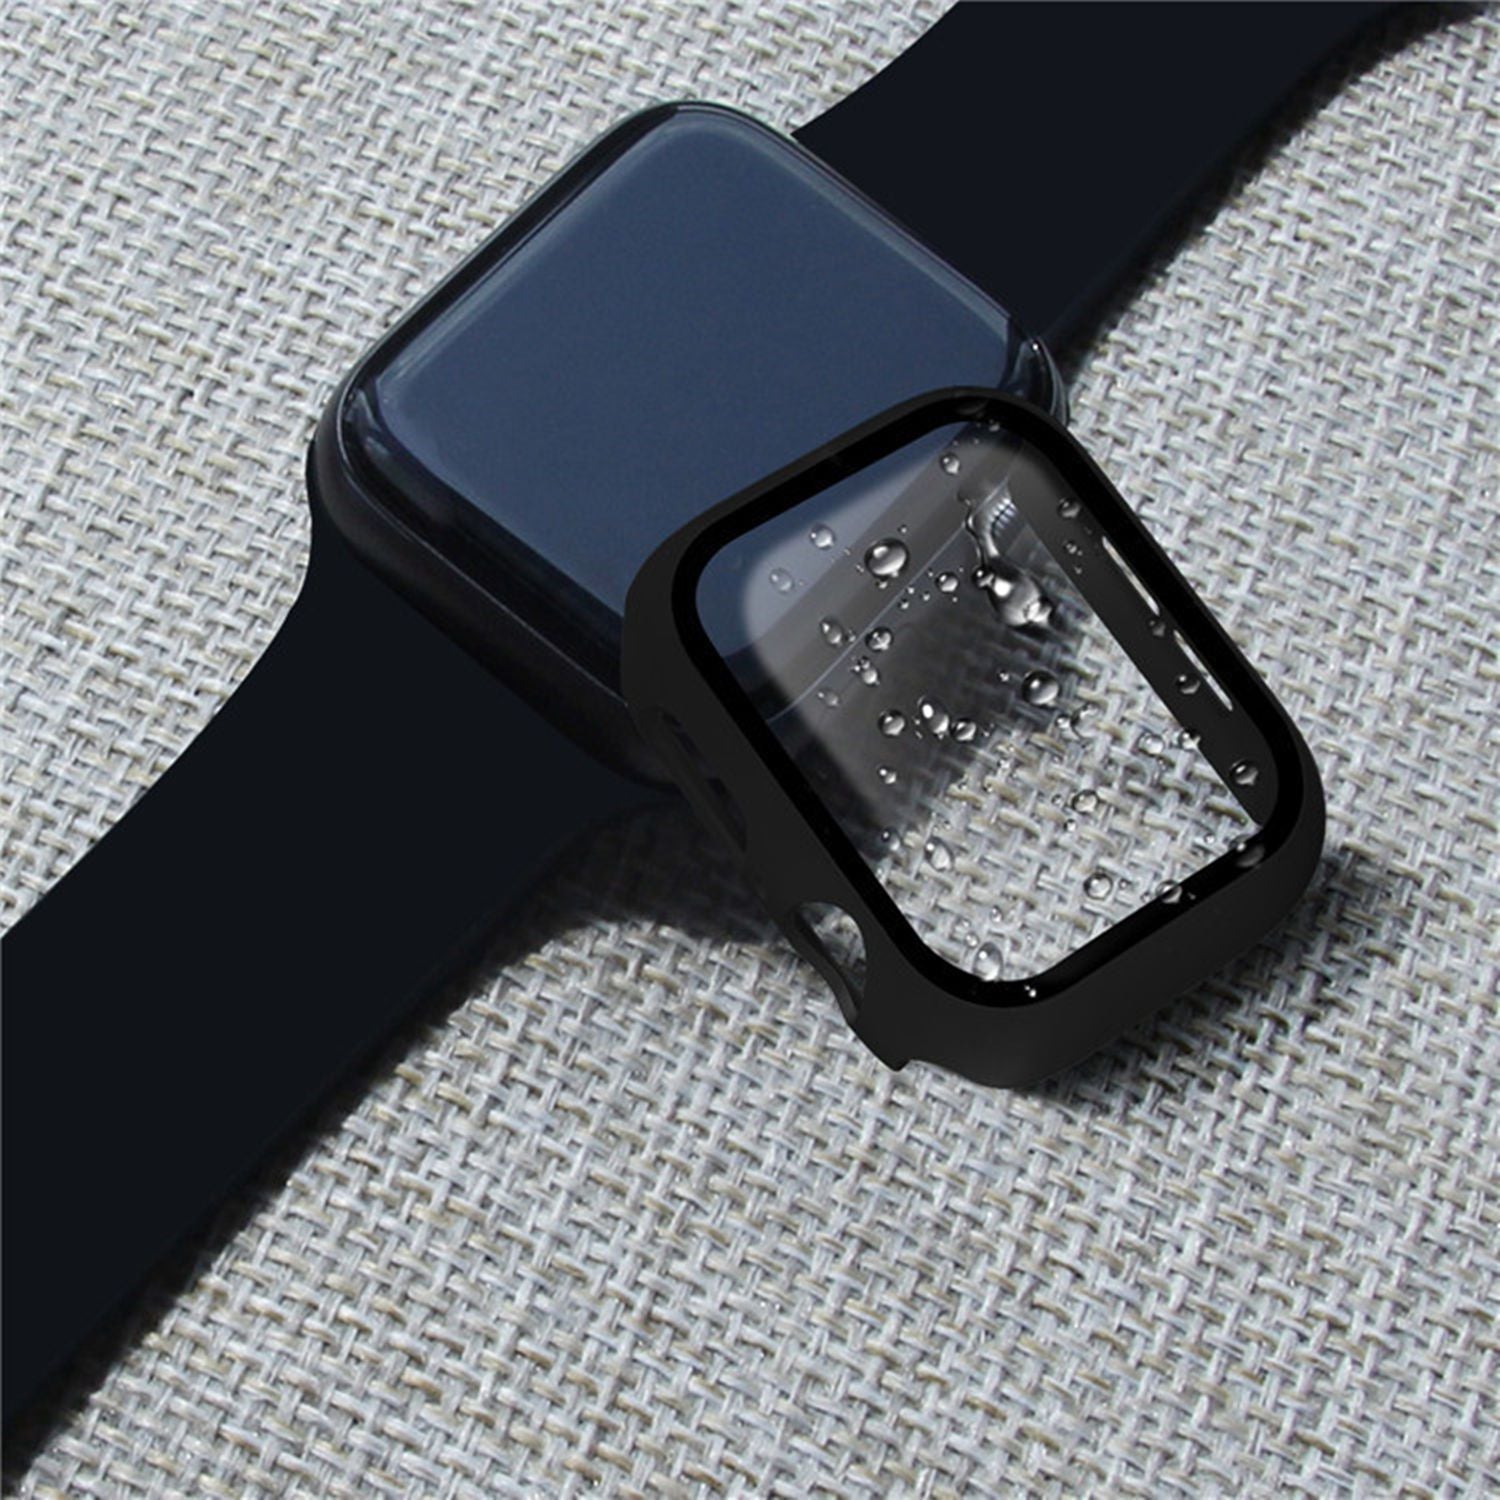 RhinoGuards 360 Full Protection Integrated Tempered Glass + Case For Apple Watch